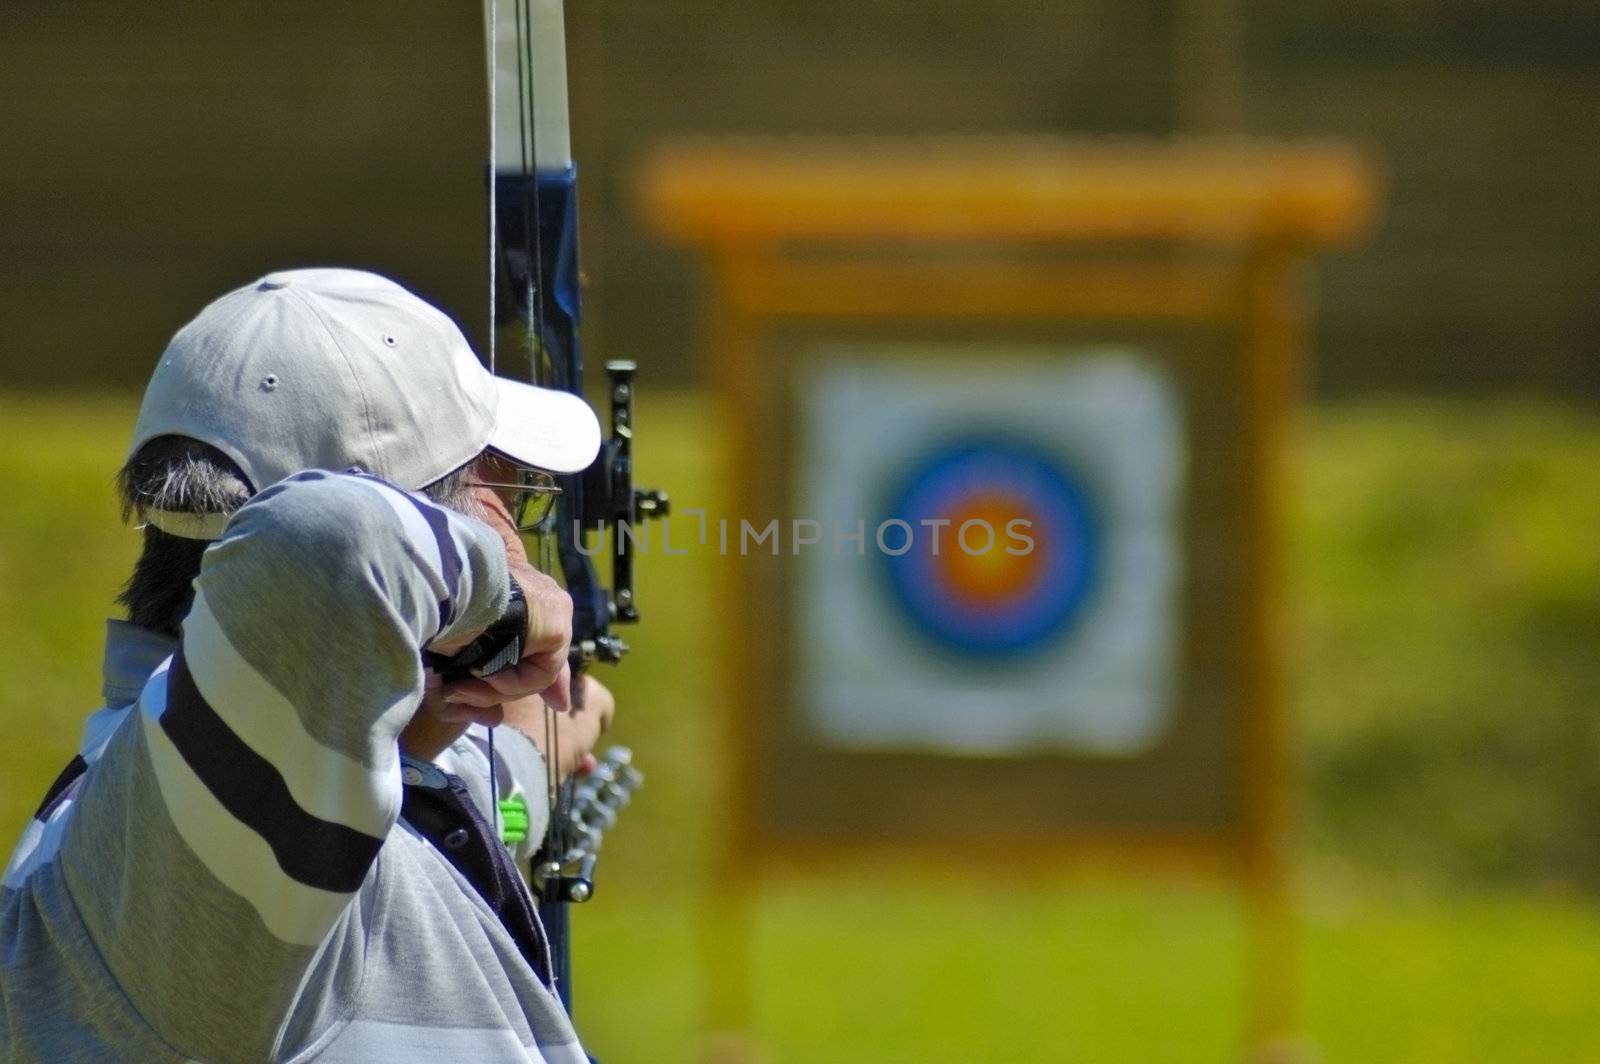 An archer aims at the bullseye of a distant target. Selective focus on the archer's head.